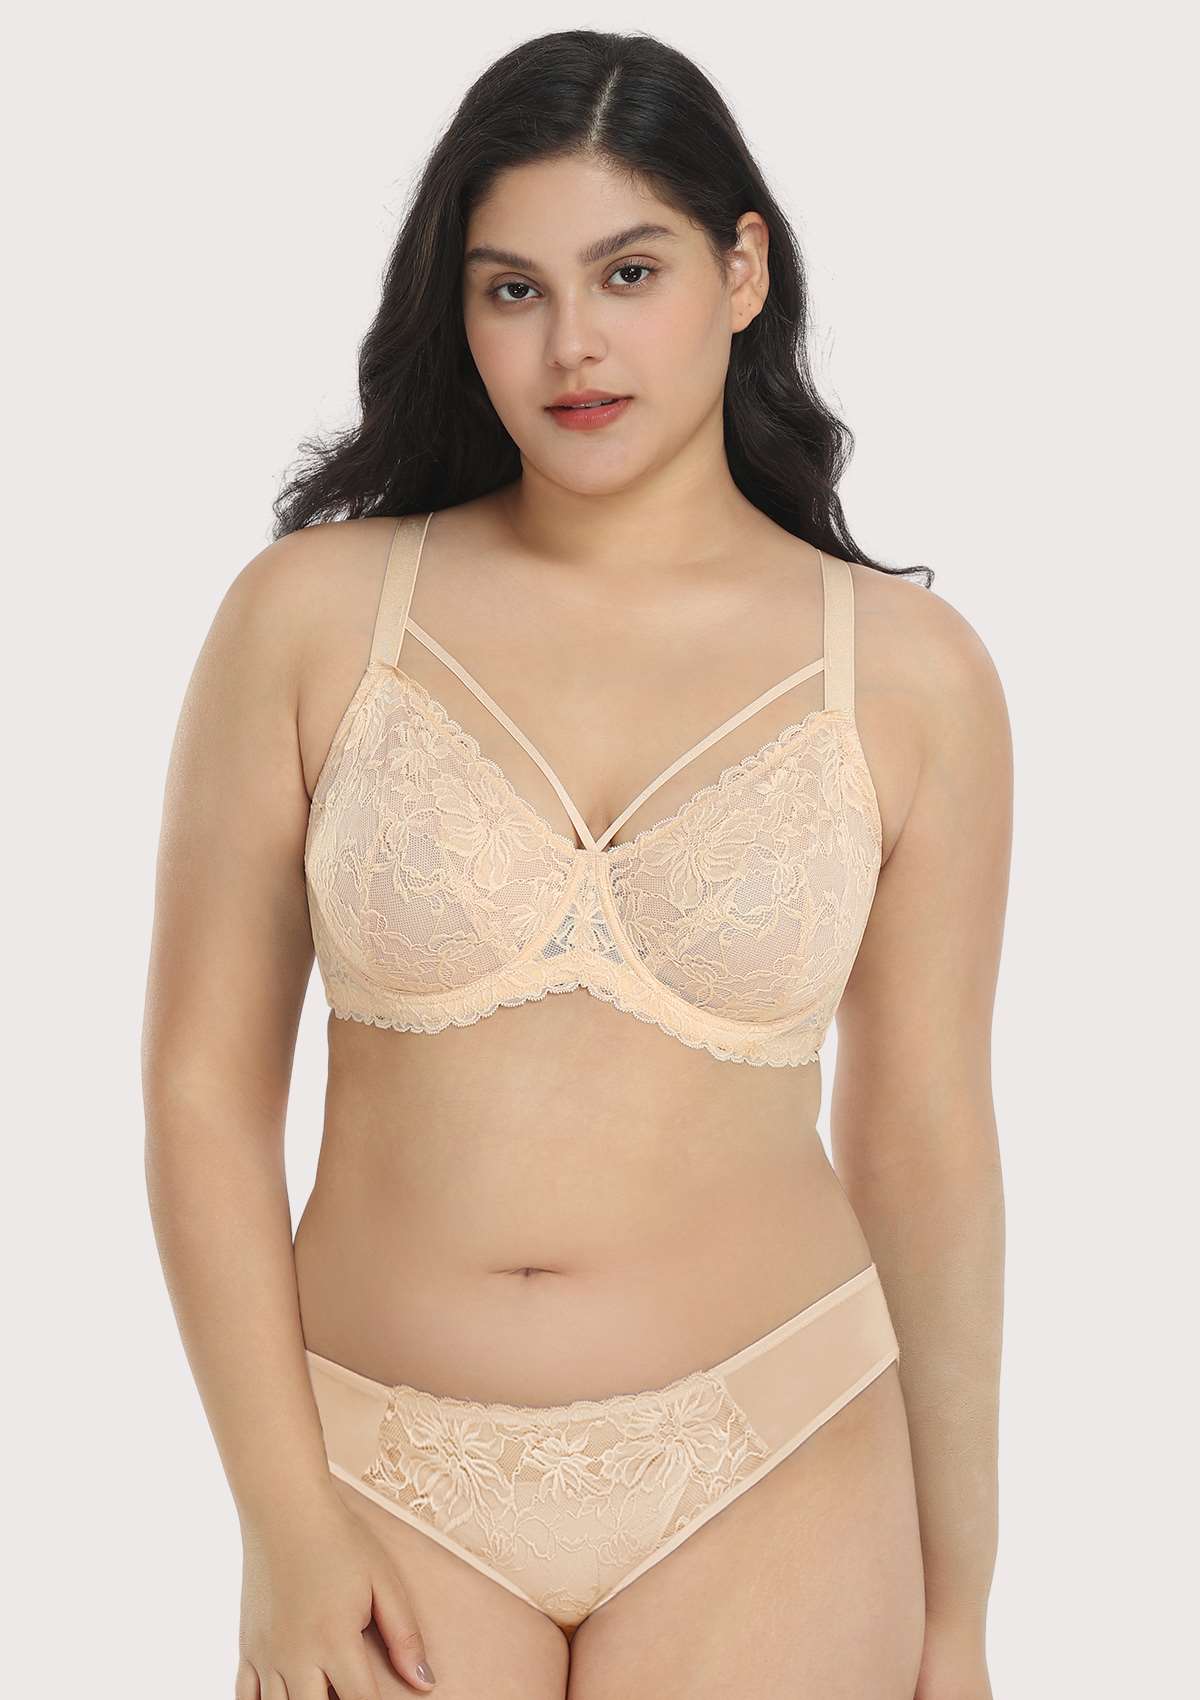 HSIA Pretty In Petals Lace Bra And Panty Set: Comfortable Support Bra - Beige Cream / 40 / H